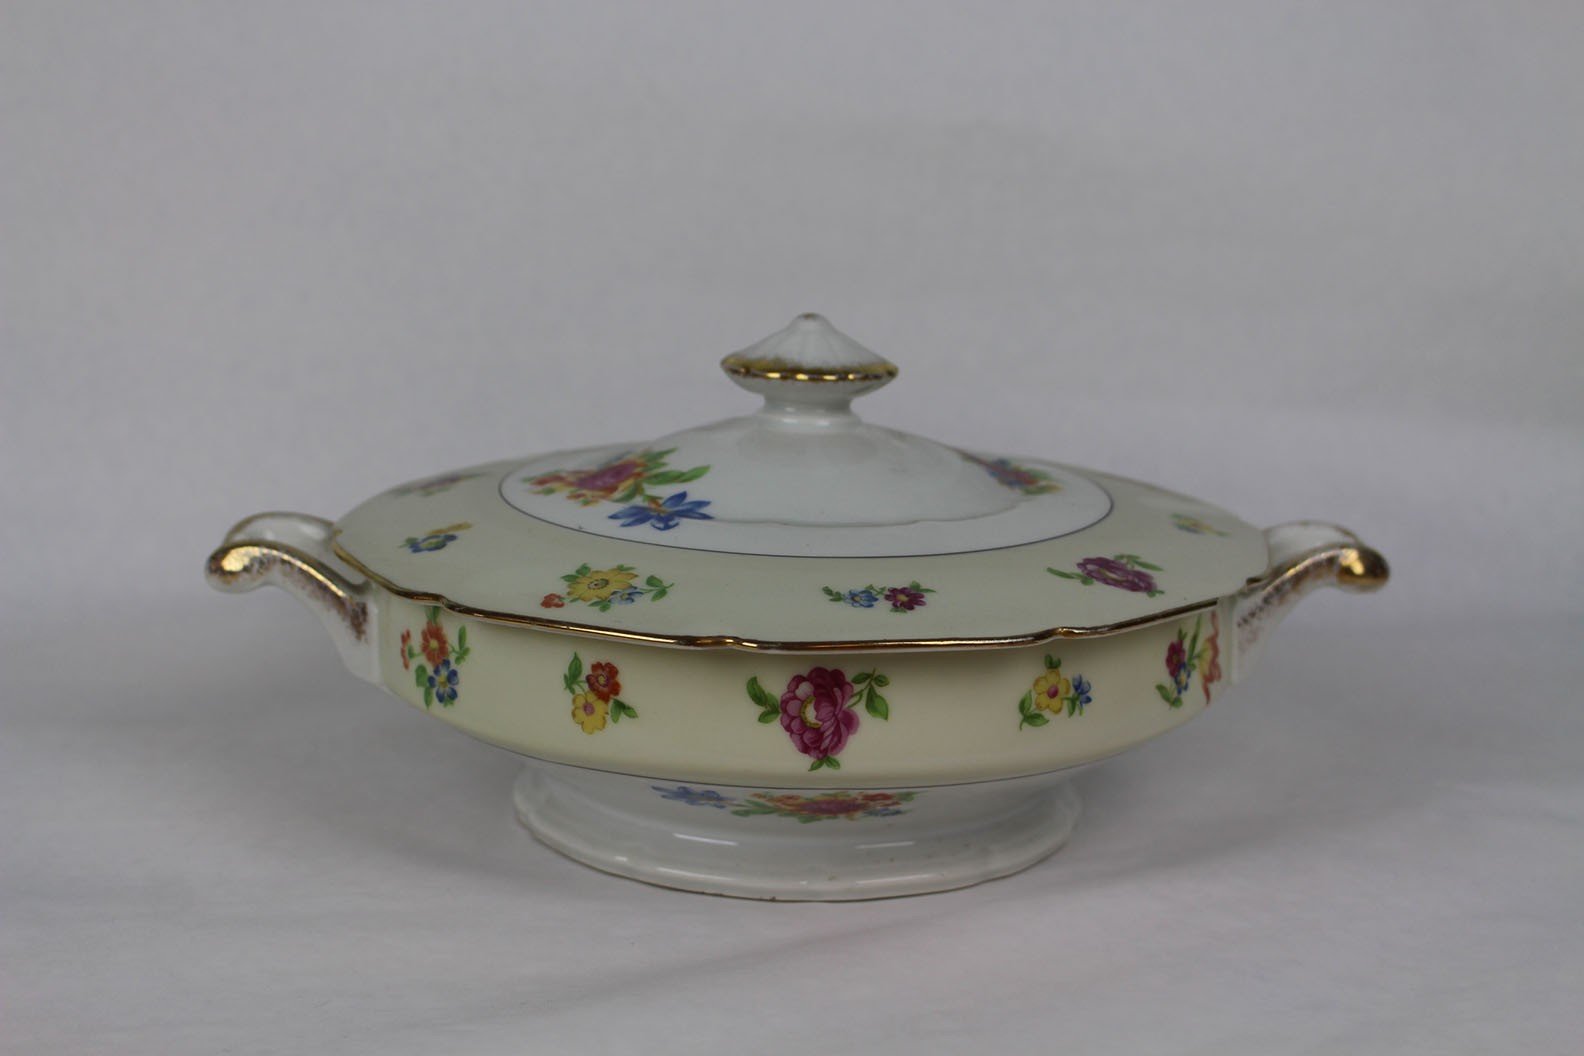 A vintage ceramic casserole dish or tureen with a lid - a family object part of the Tenement Museum Collection